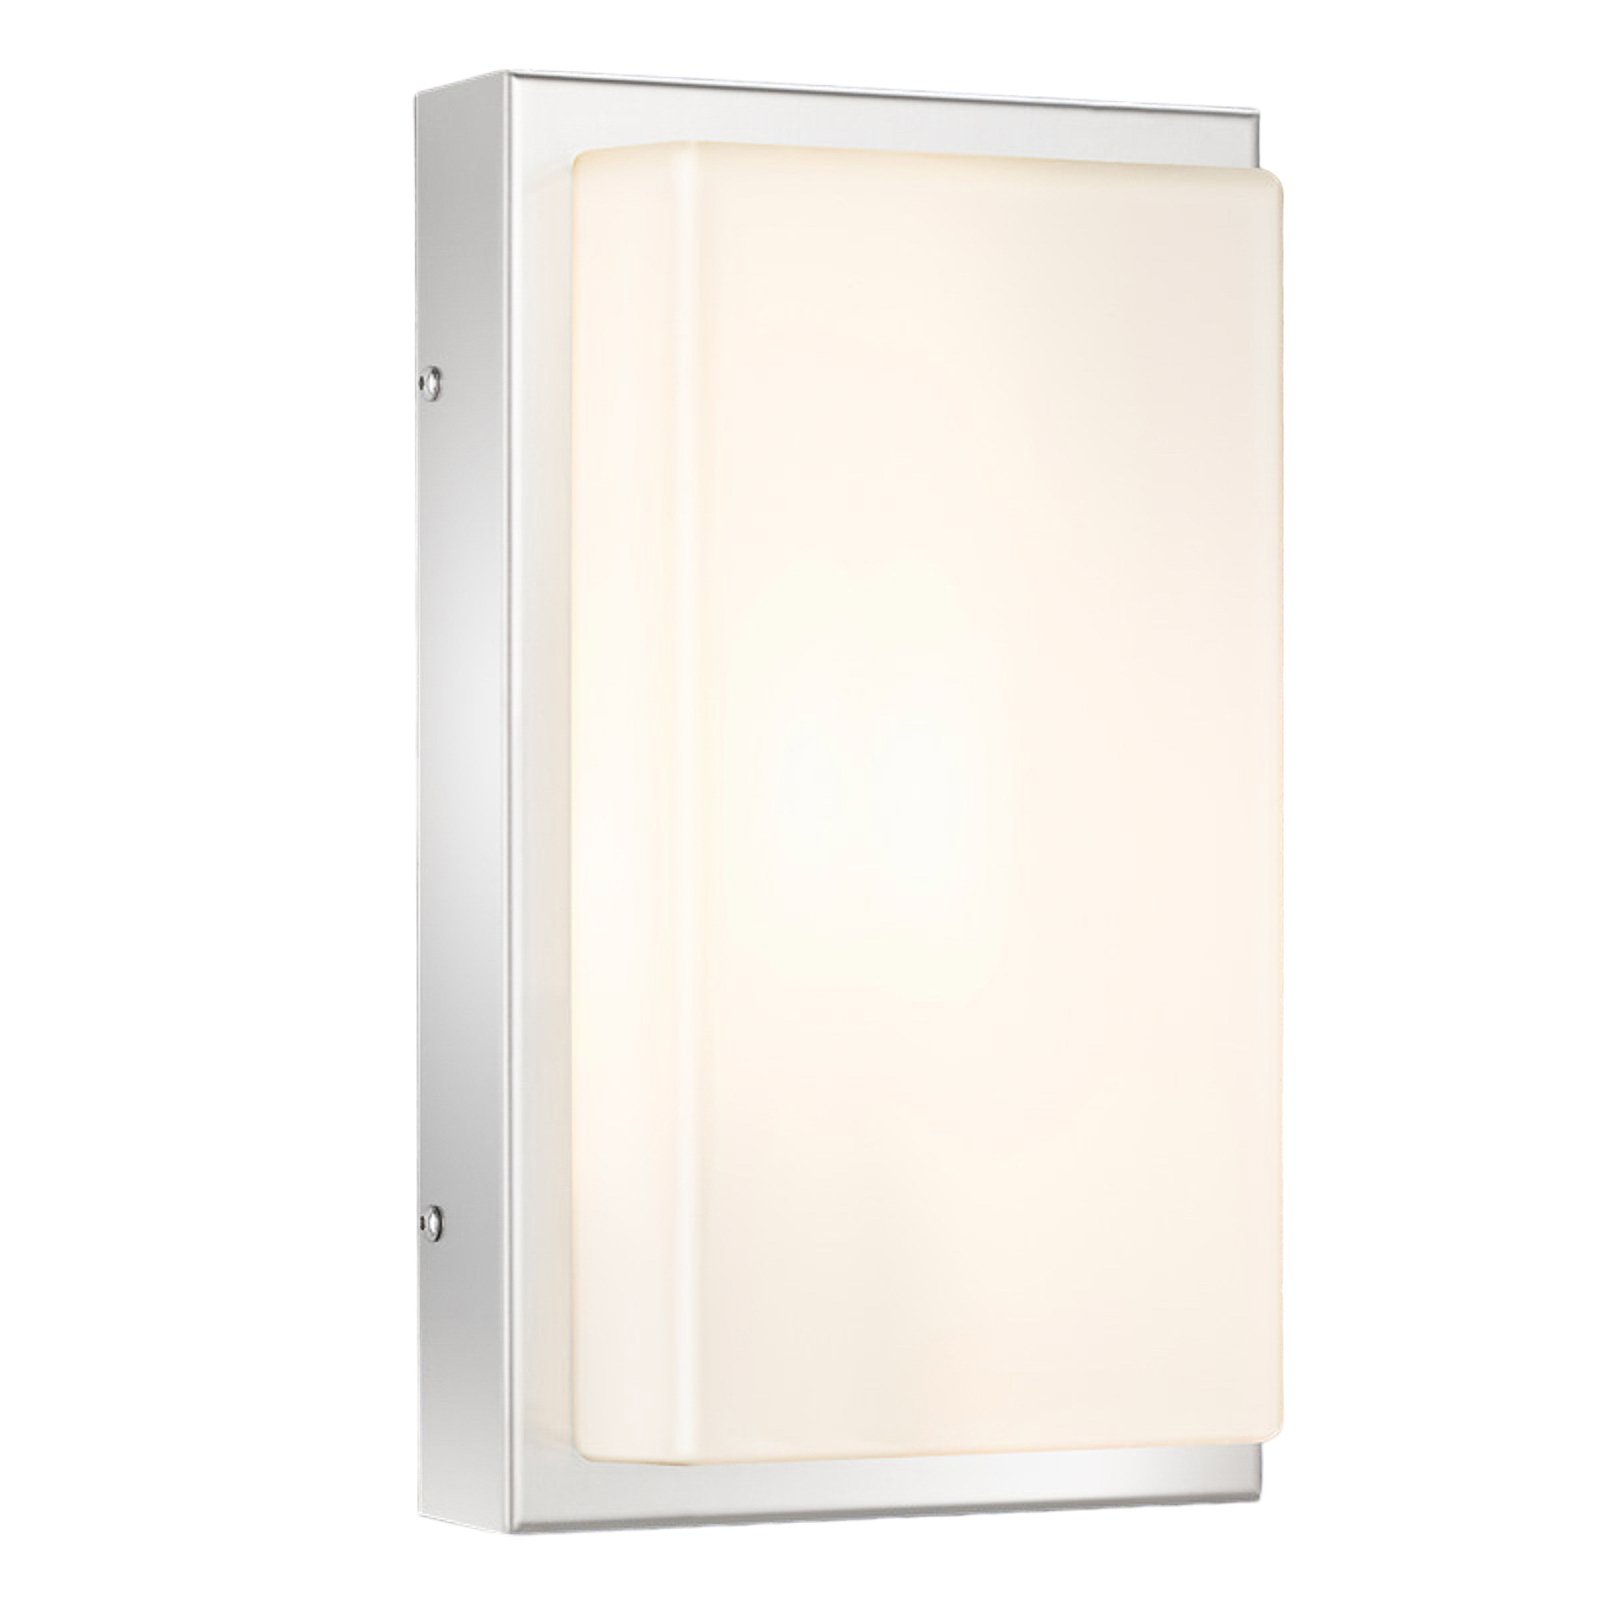 Julea - LED outdoor wall light with motion detector